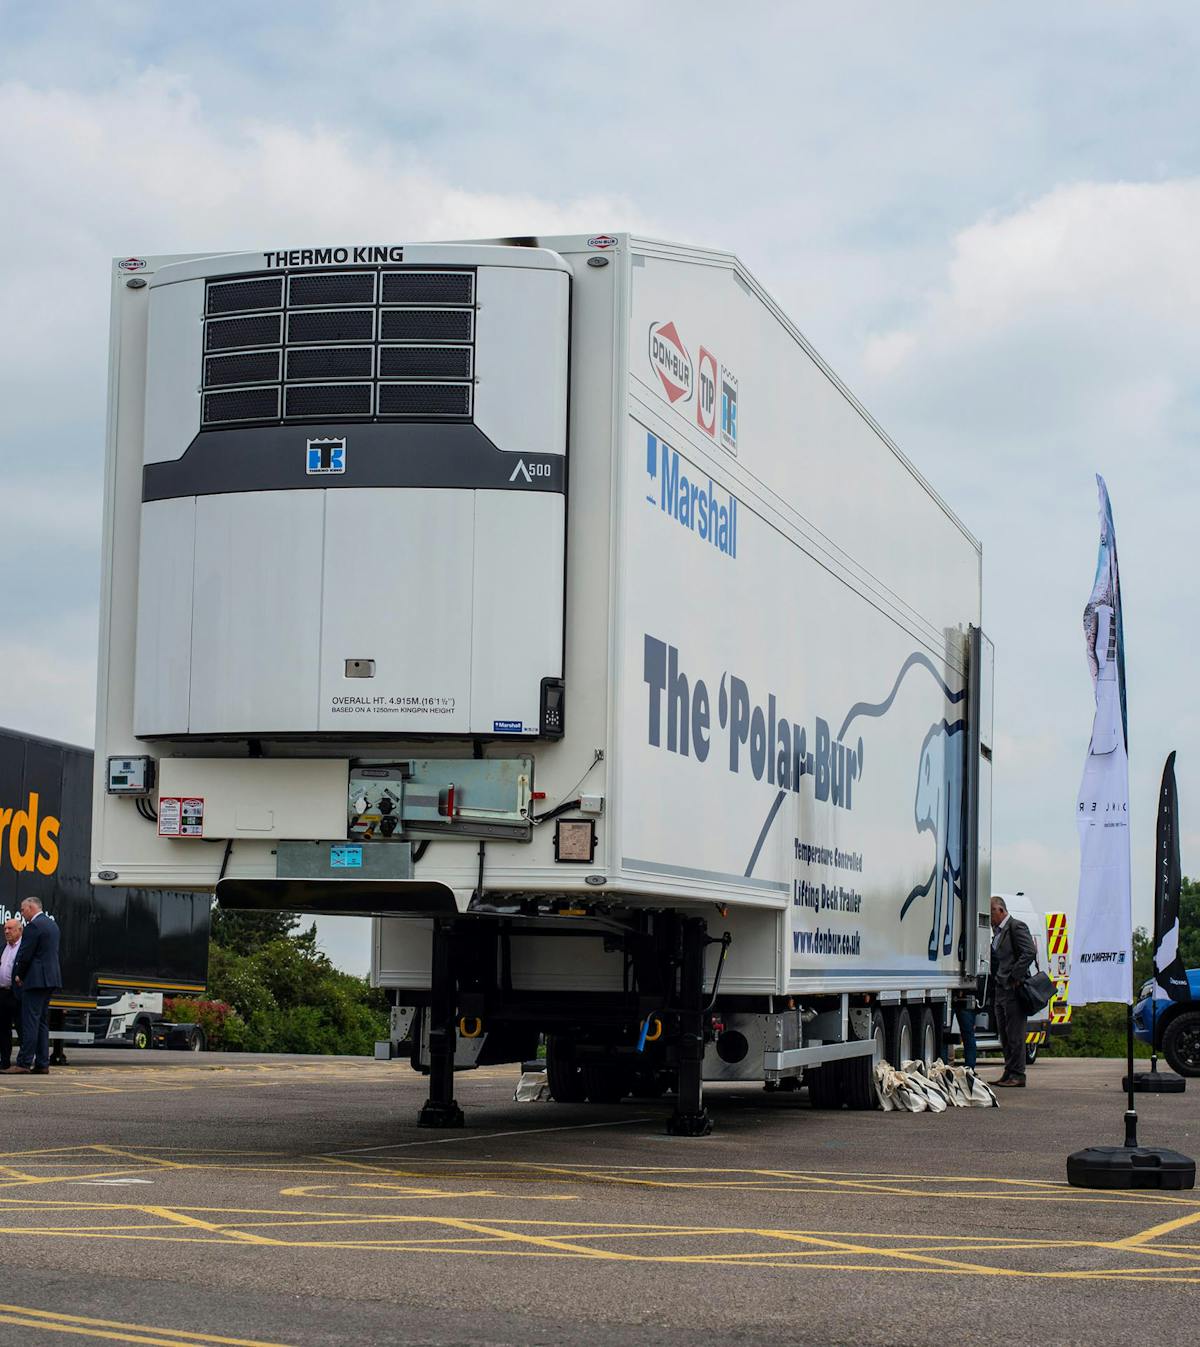 The first Polar-Bur trailer that was on display at the TIP Open Day was fitted with the latest Thermo King Advancer A500 refrigeration system.